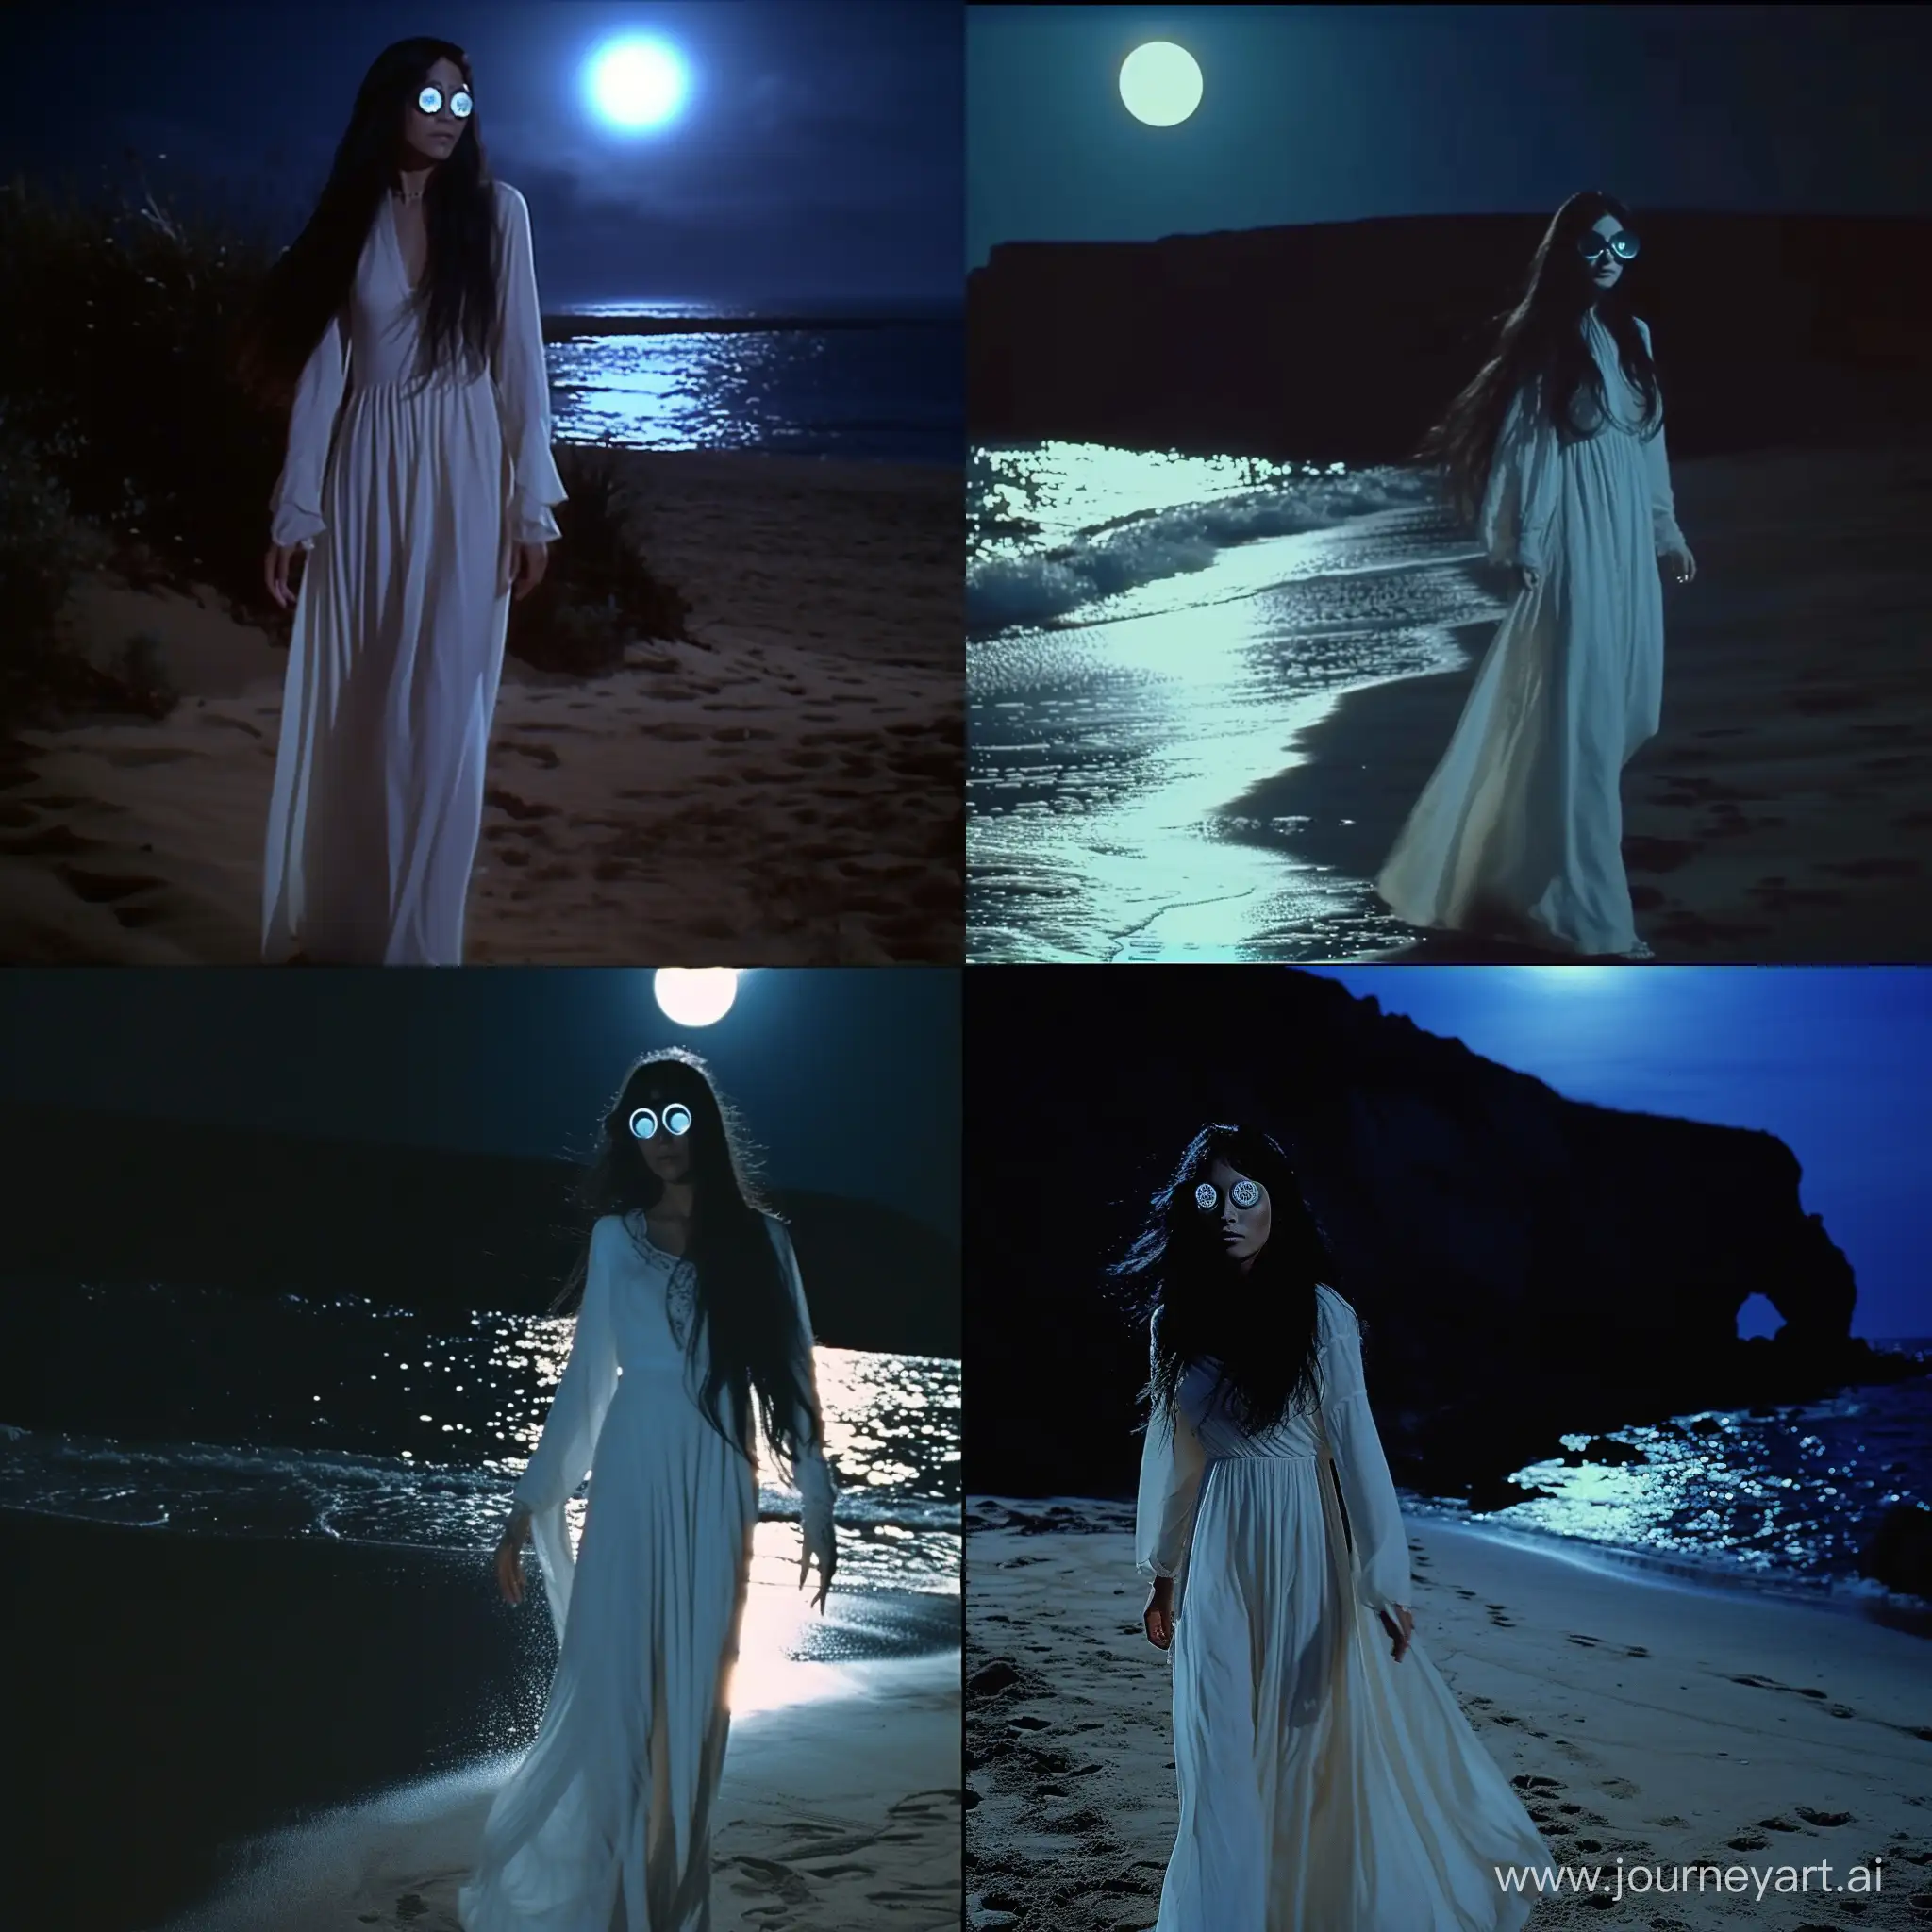 a woman with long black hair completely white glass eyes wearing a long white dress walking at night on a beach with the moonlight illuminating it, screenshot from excalibur 1981